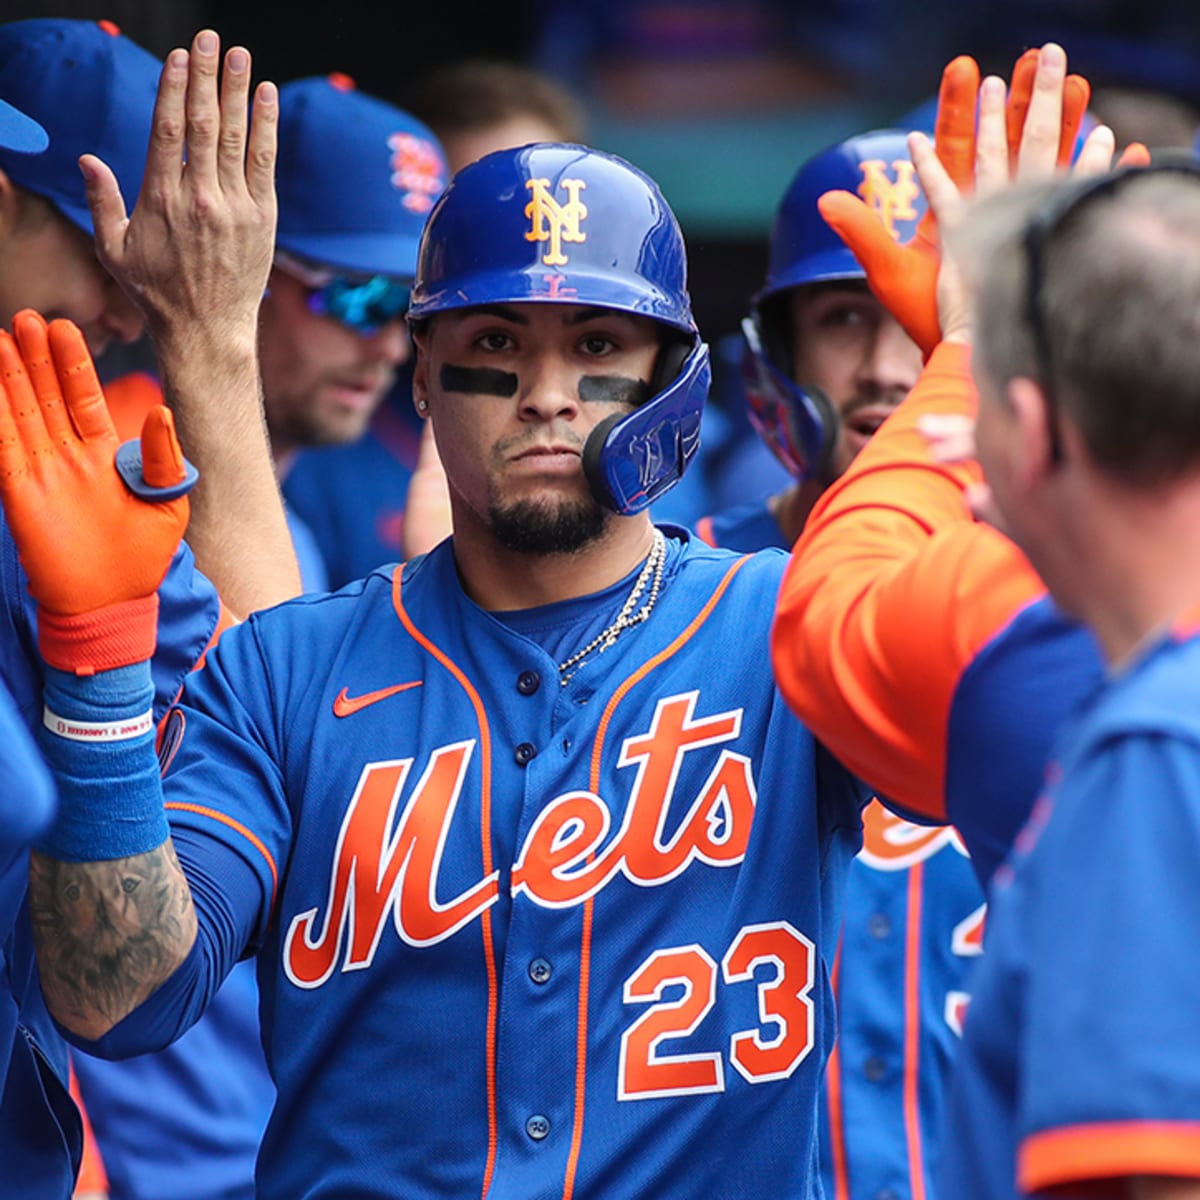 Mets players reacted to backlash over thumbs-down celebration for fans